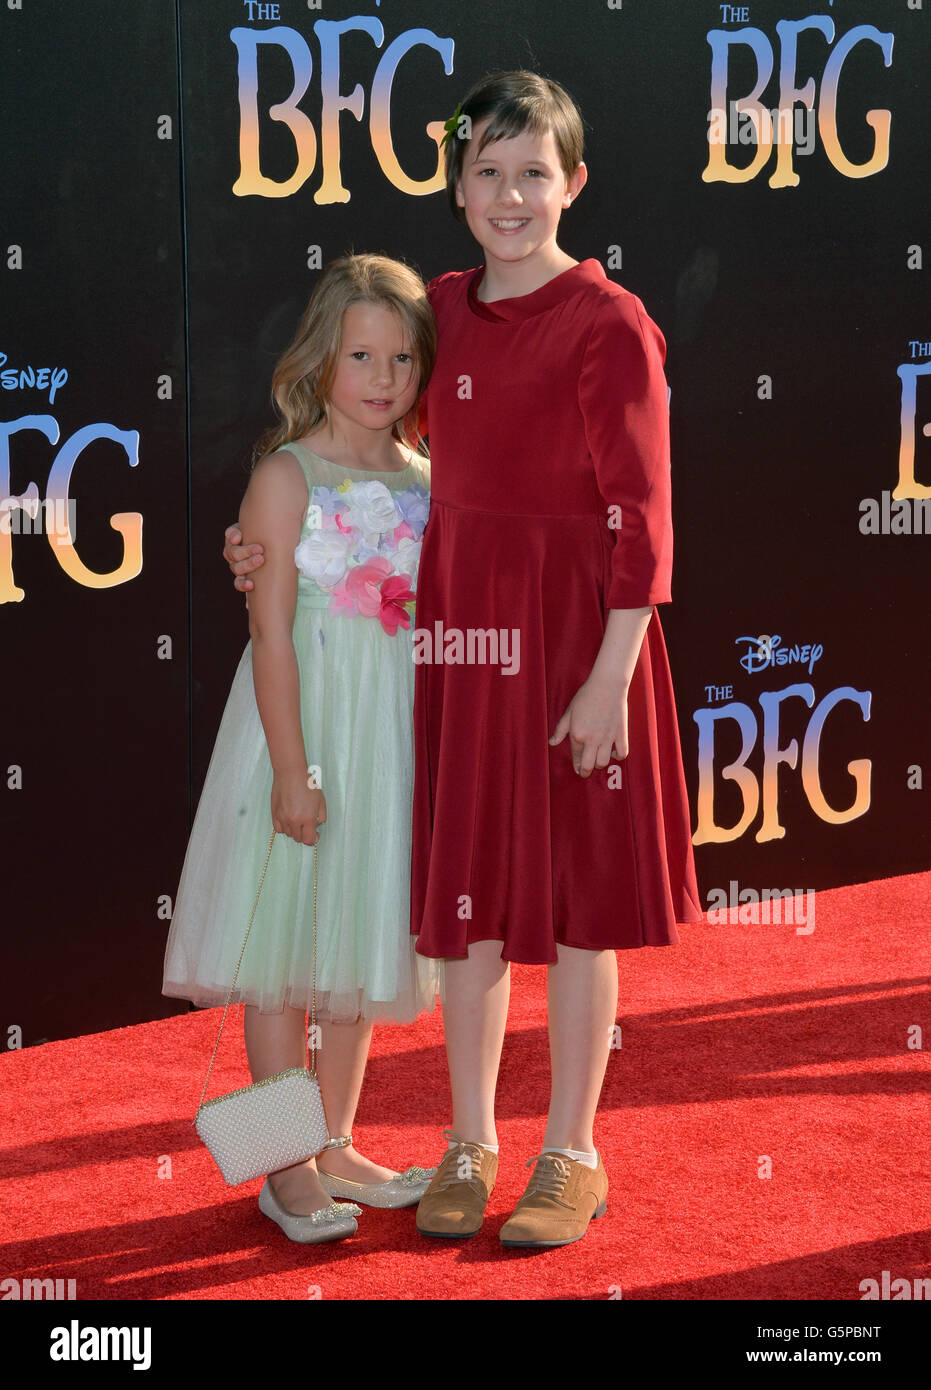 Los Angeles, California, USA. 21st June, 2016. Actress Ruby Barnhill & sister Darcey Barnhill (left) at the U.S. premiere of Disney's 'The BFG' at the El Capitan Theatre, Hollywood.  Credit:  Sarah Stewart/Alamy Live News Stock Photo